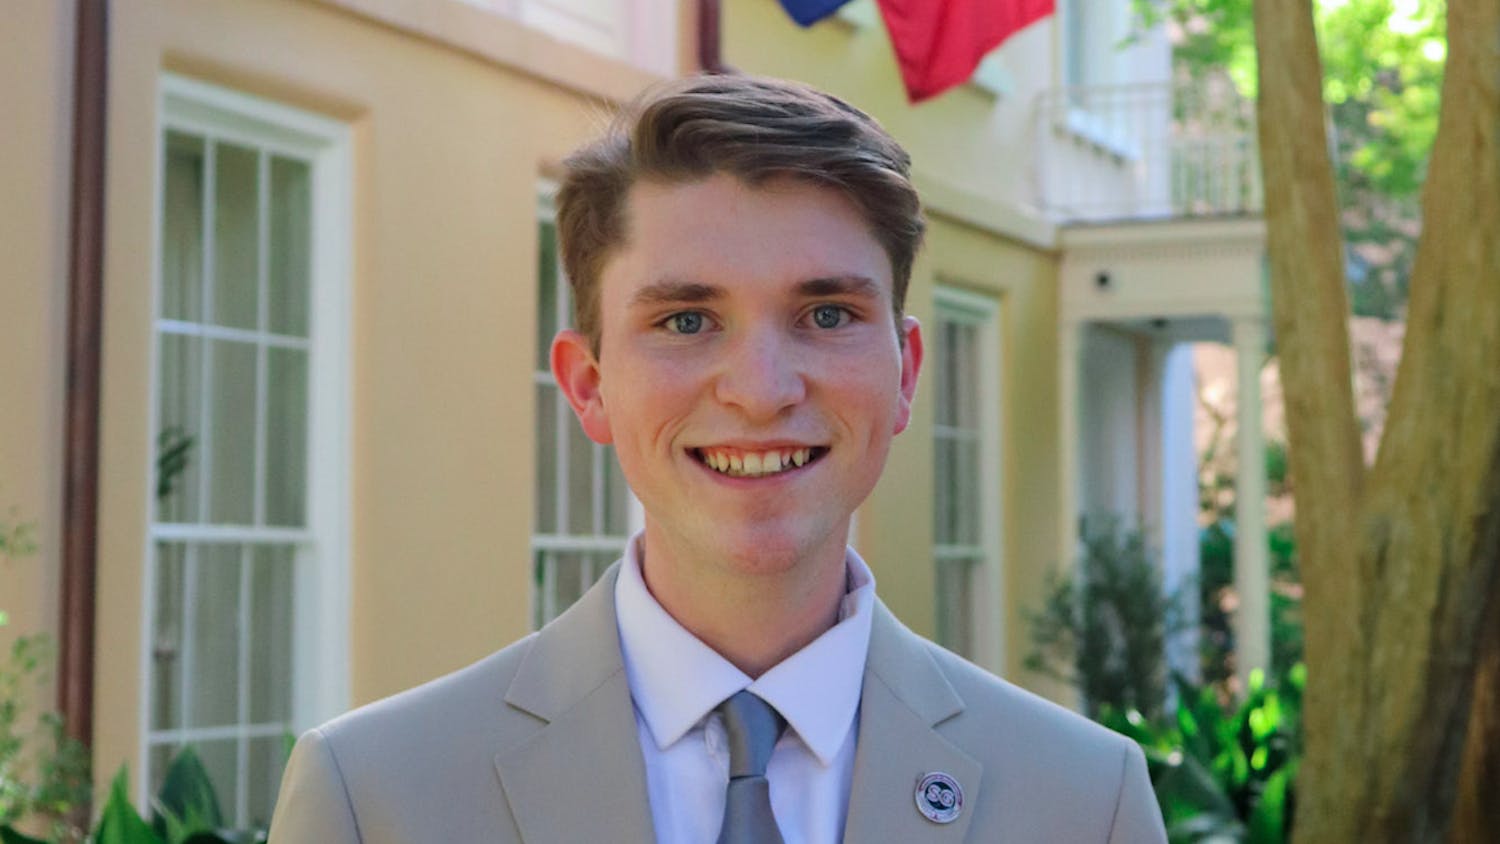 Noah Glasgow, the lone candidate running to become the next Speaker of the Student Senate, poses for a photo. Students can vote for candidates from Feb. 22 at 9 a.m. to Feb. 23 at 5 p.m. Ballots will be available online.